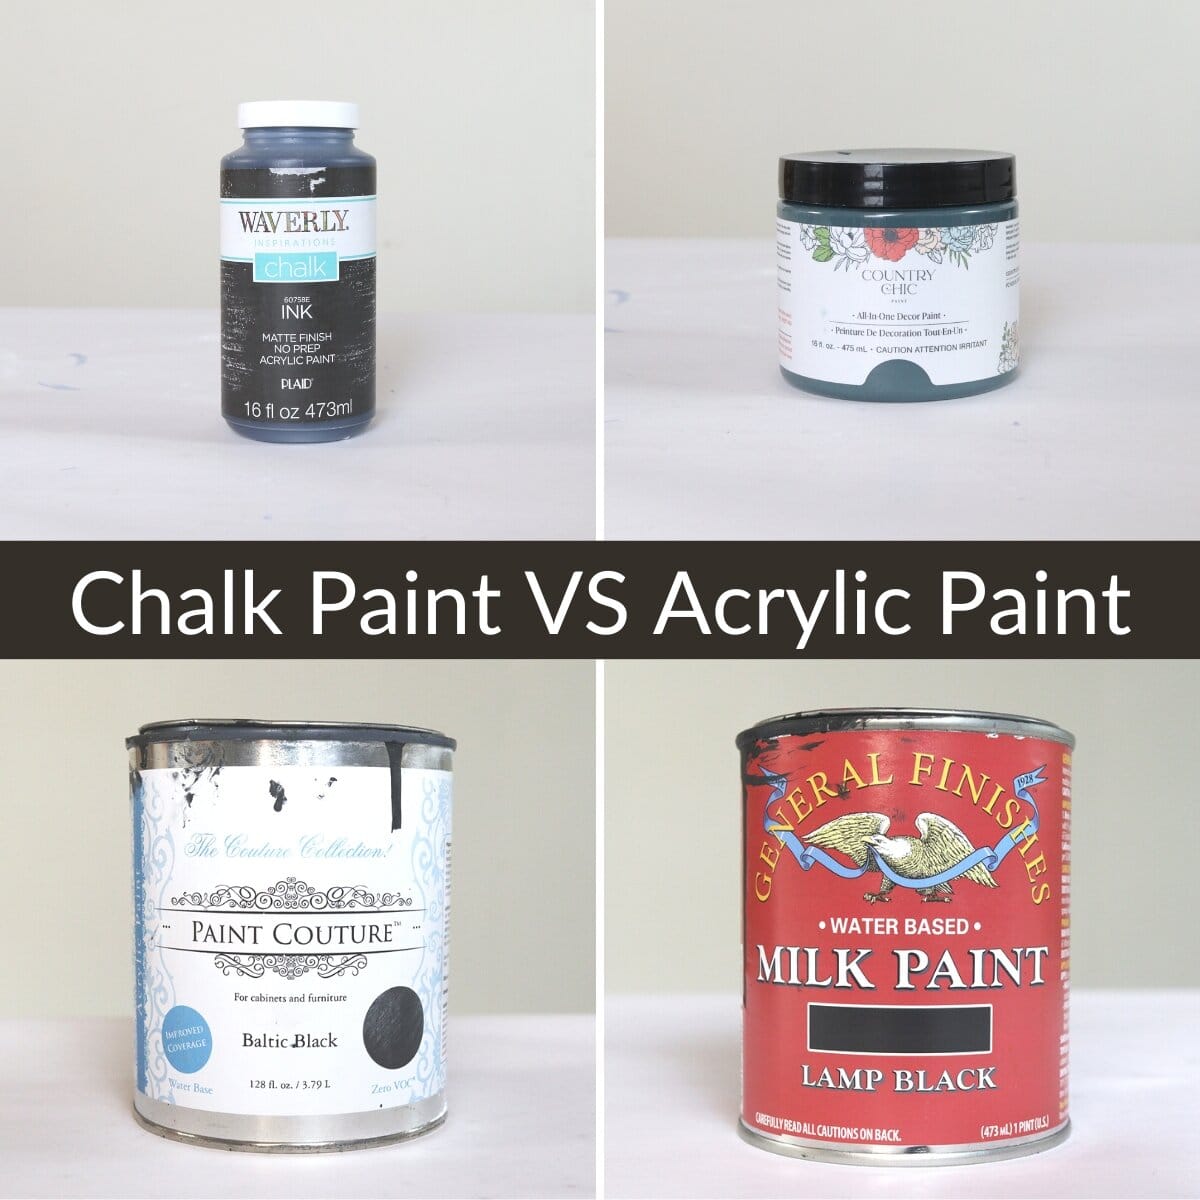 Chalk Paint VS Acrylic Paint: Which Is Best For Furniture Painting?